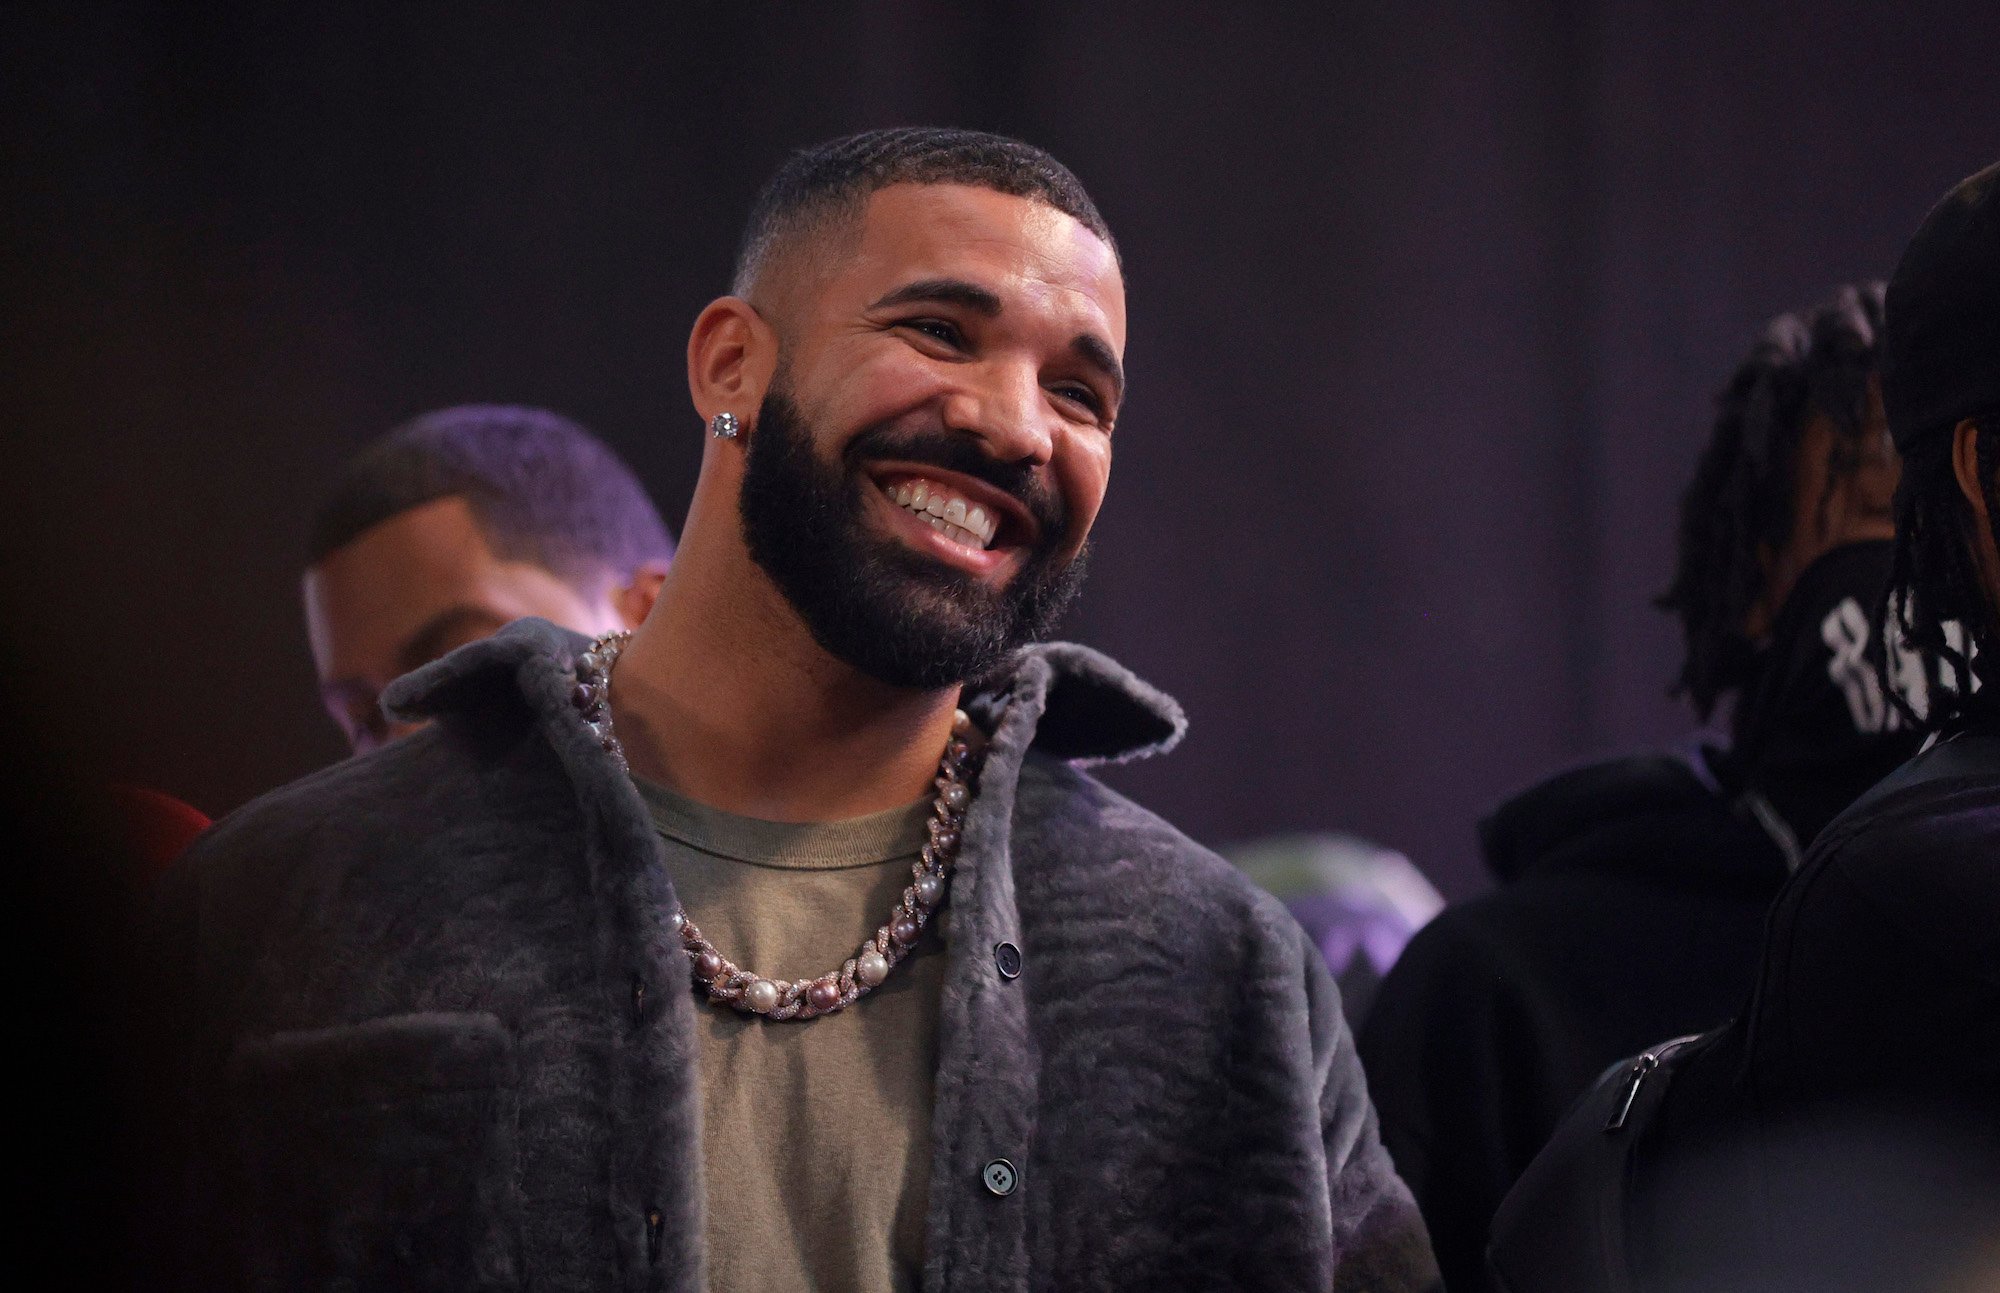 Drake, who once once paid $100 to open for Ice Cube, smiling for a photo